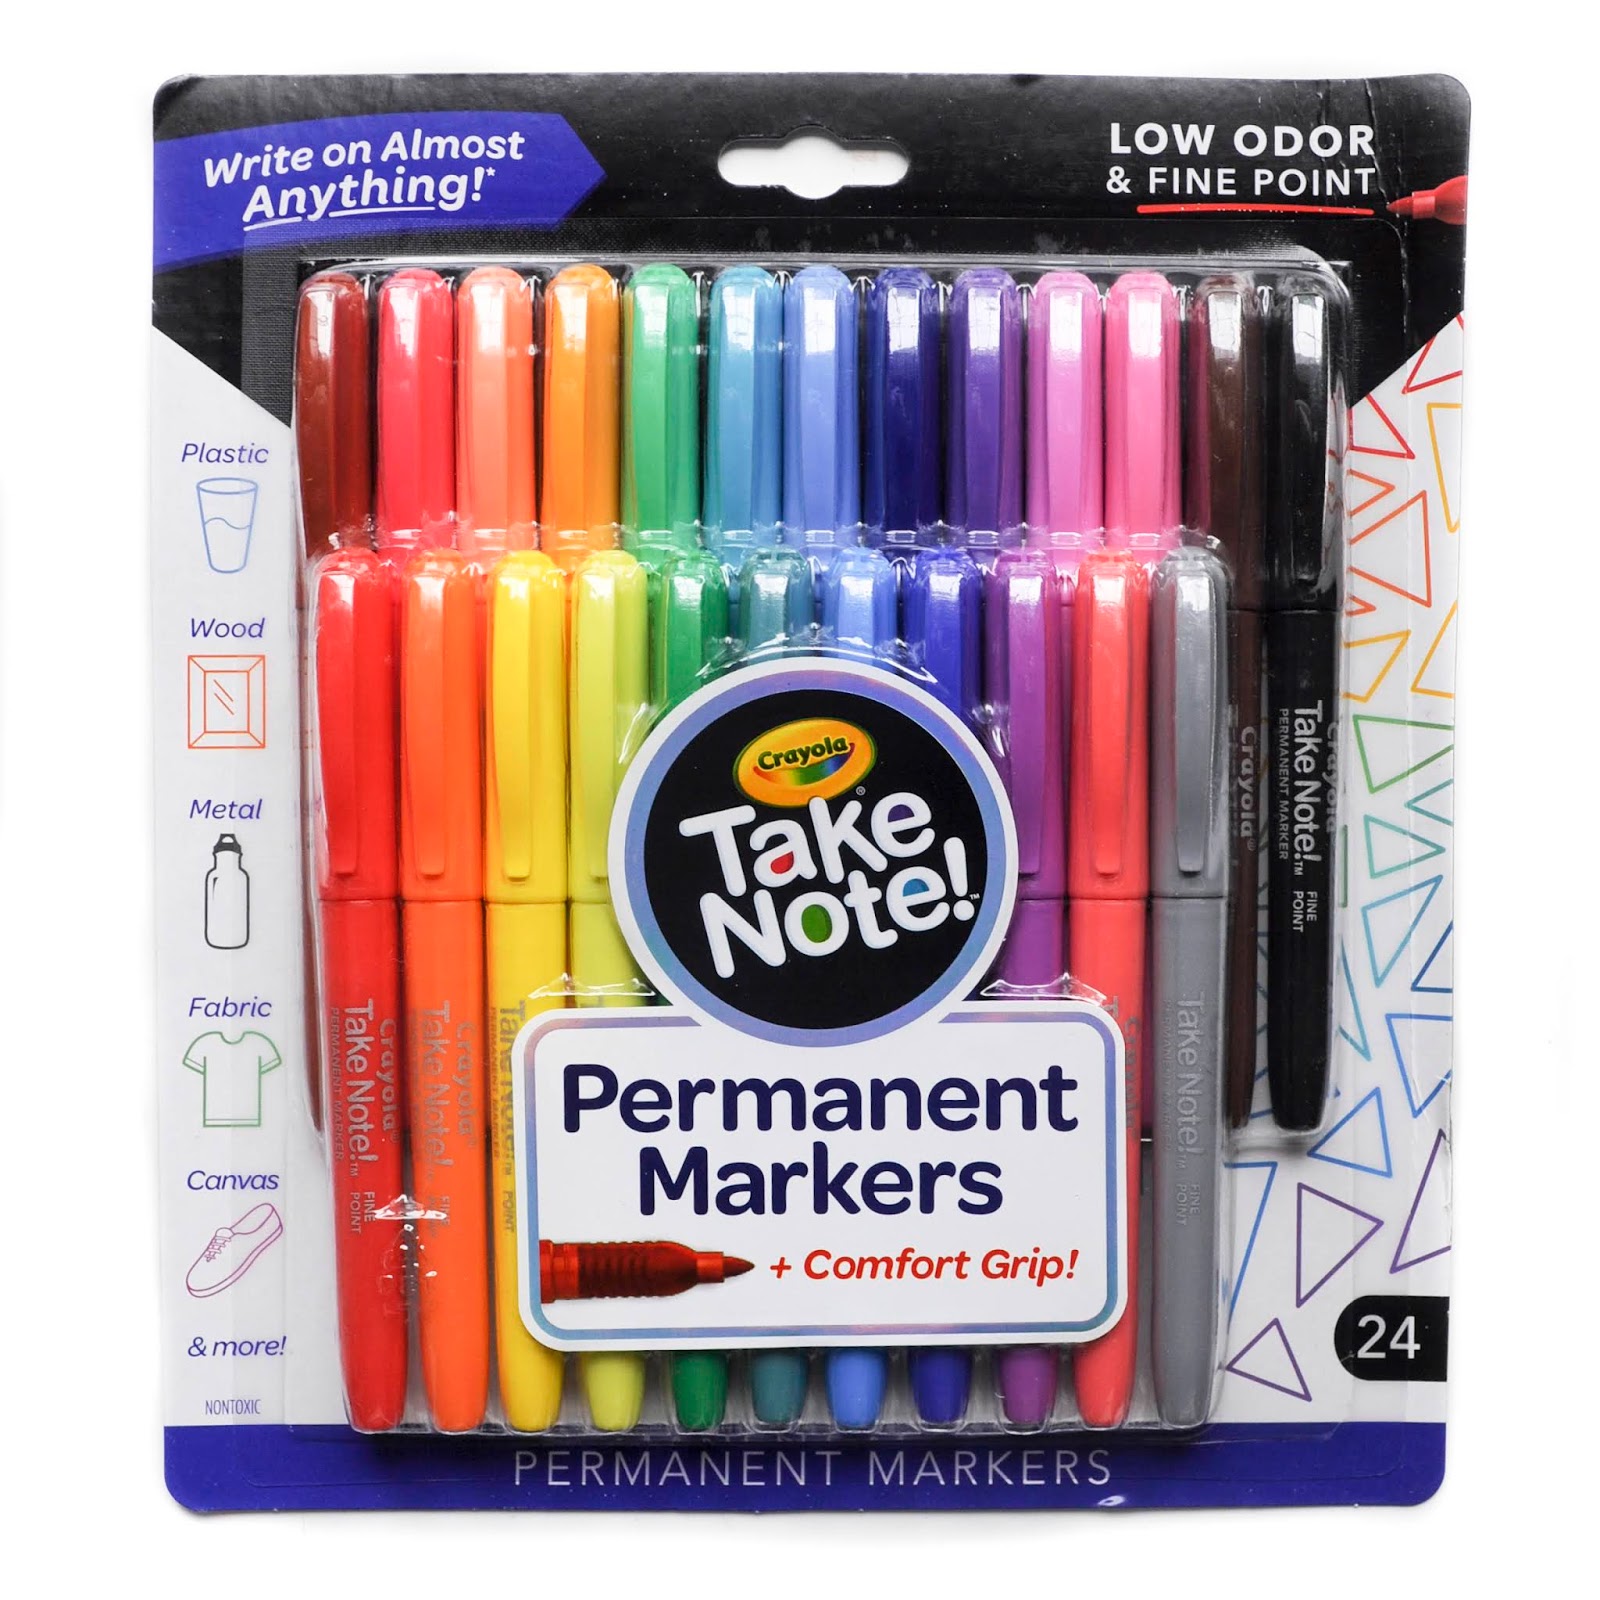 Pen Review: Crayola Gel Markers - The Well-Appointed Desk